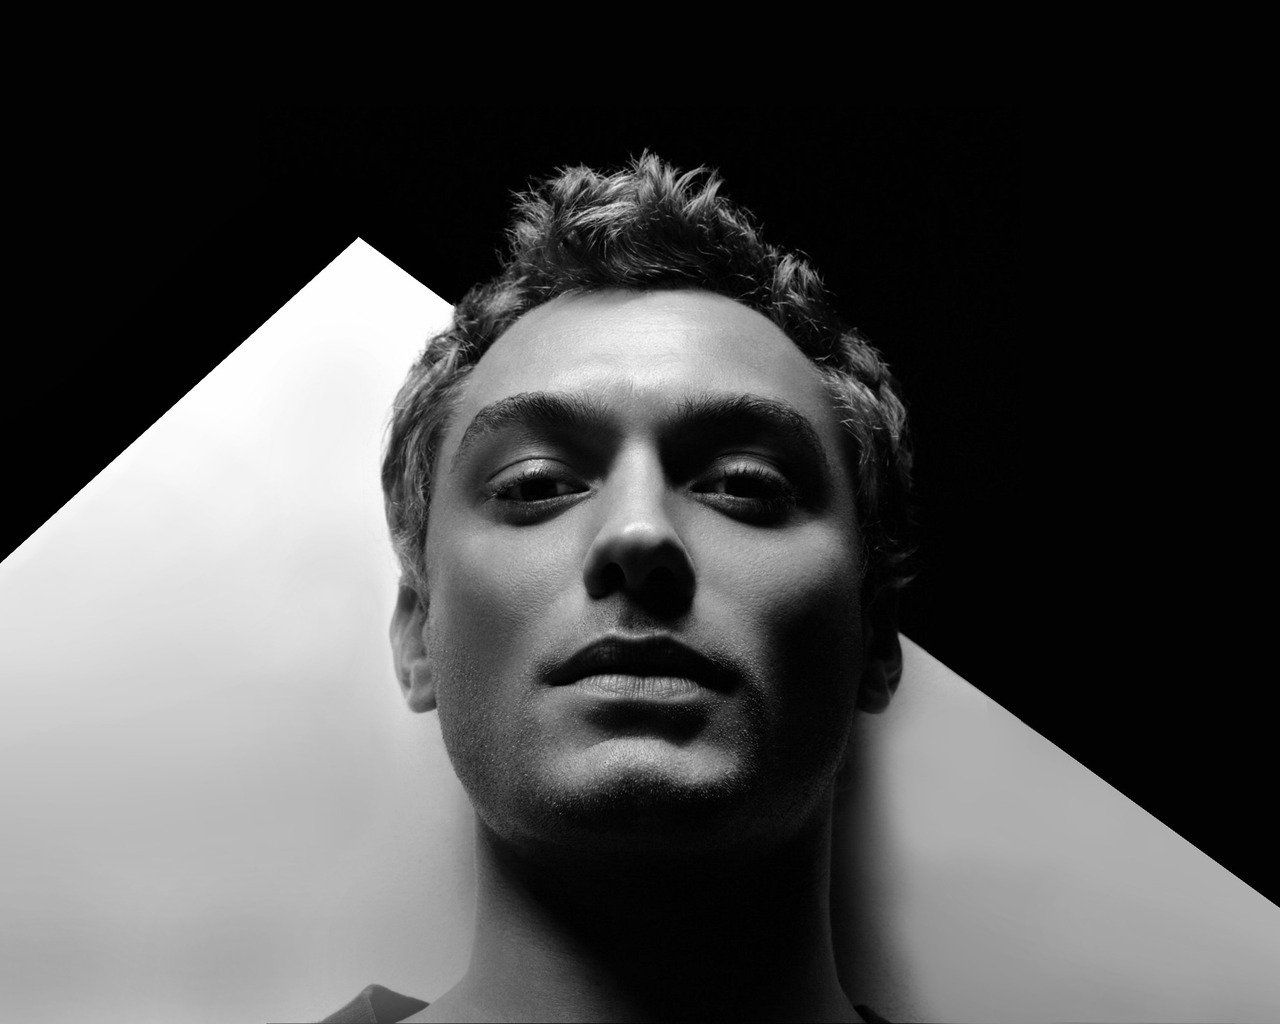 Jude Law for 1280 x 1024 resolution